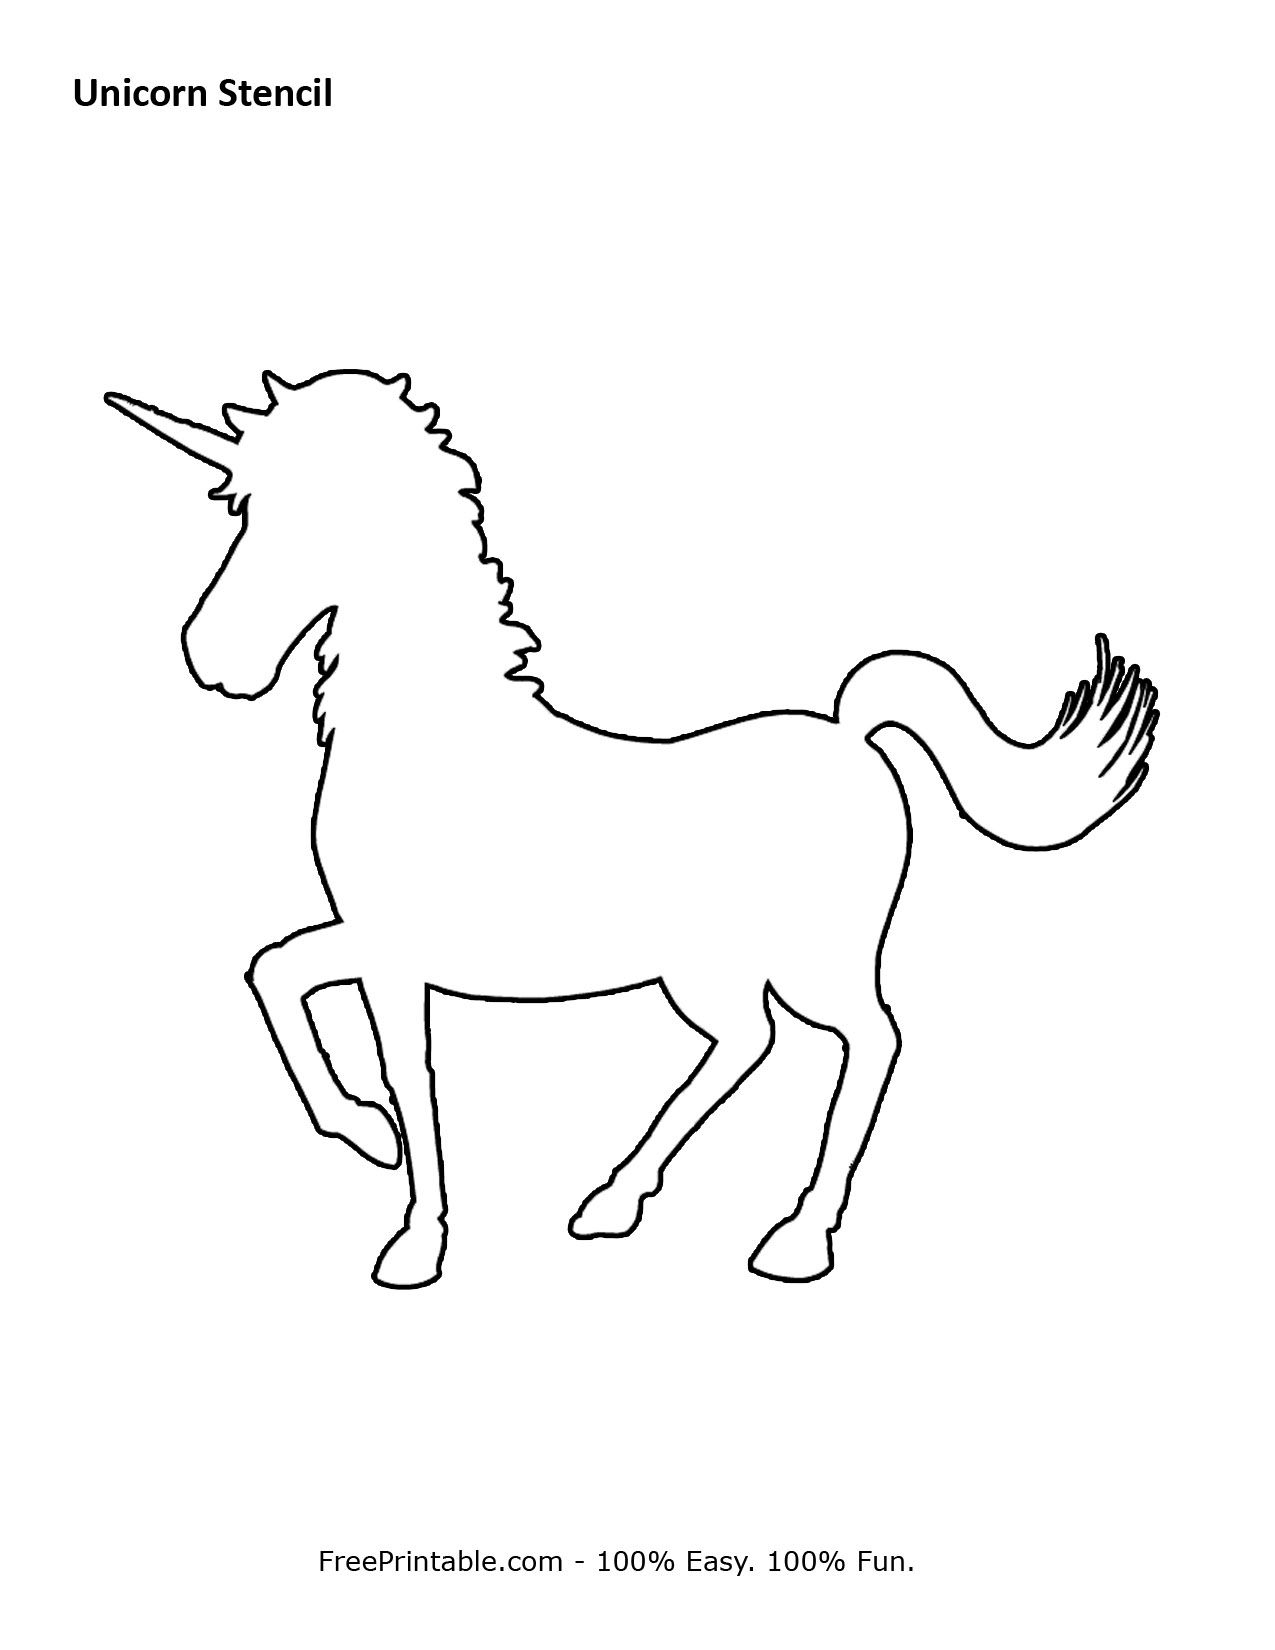 Free Printable Unicorn Stencils | Crafts &amp;amp; Sewing | Pinterest - Free Printable Poodle Template